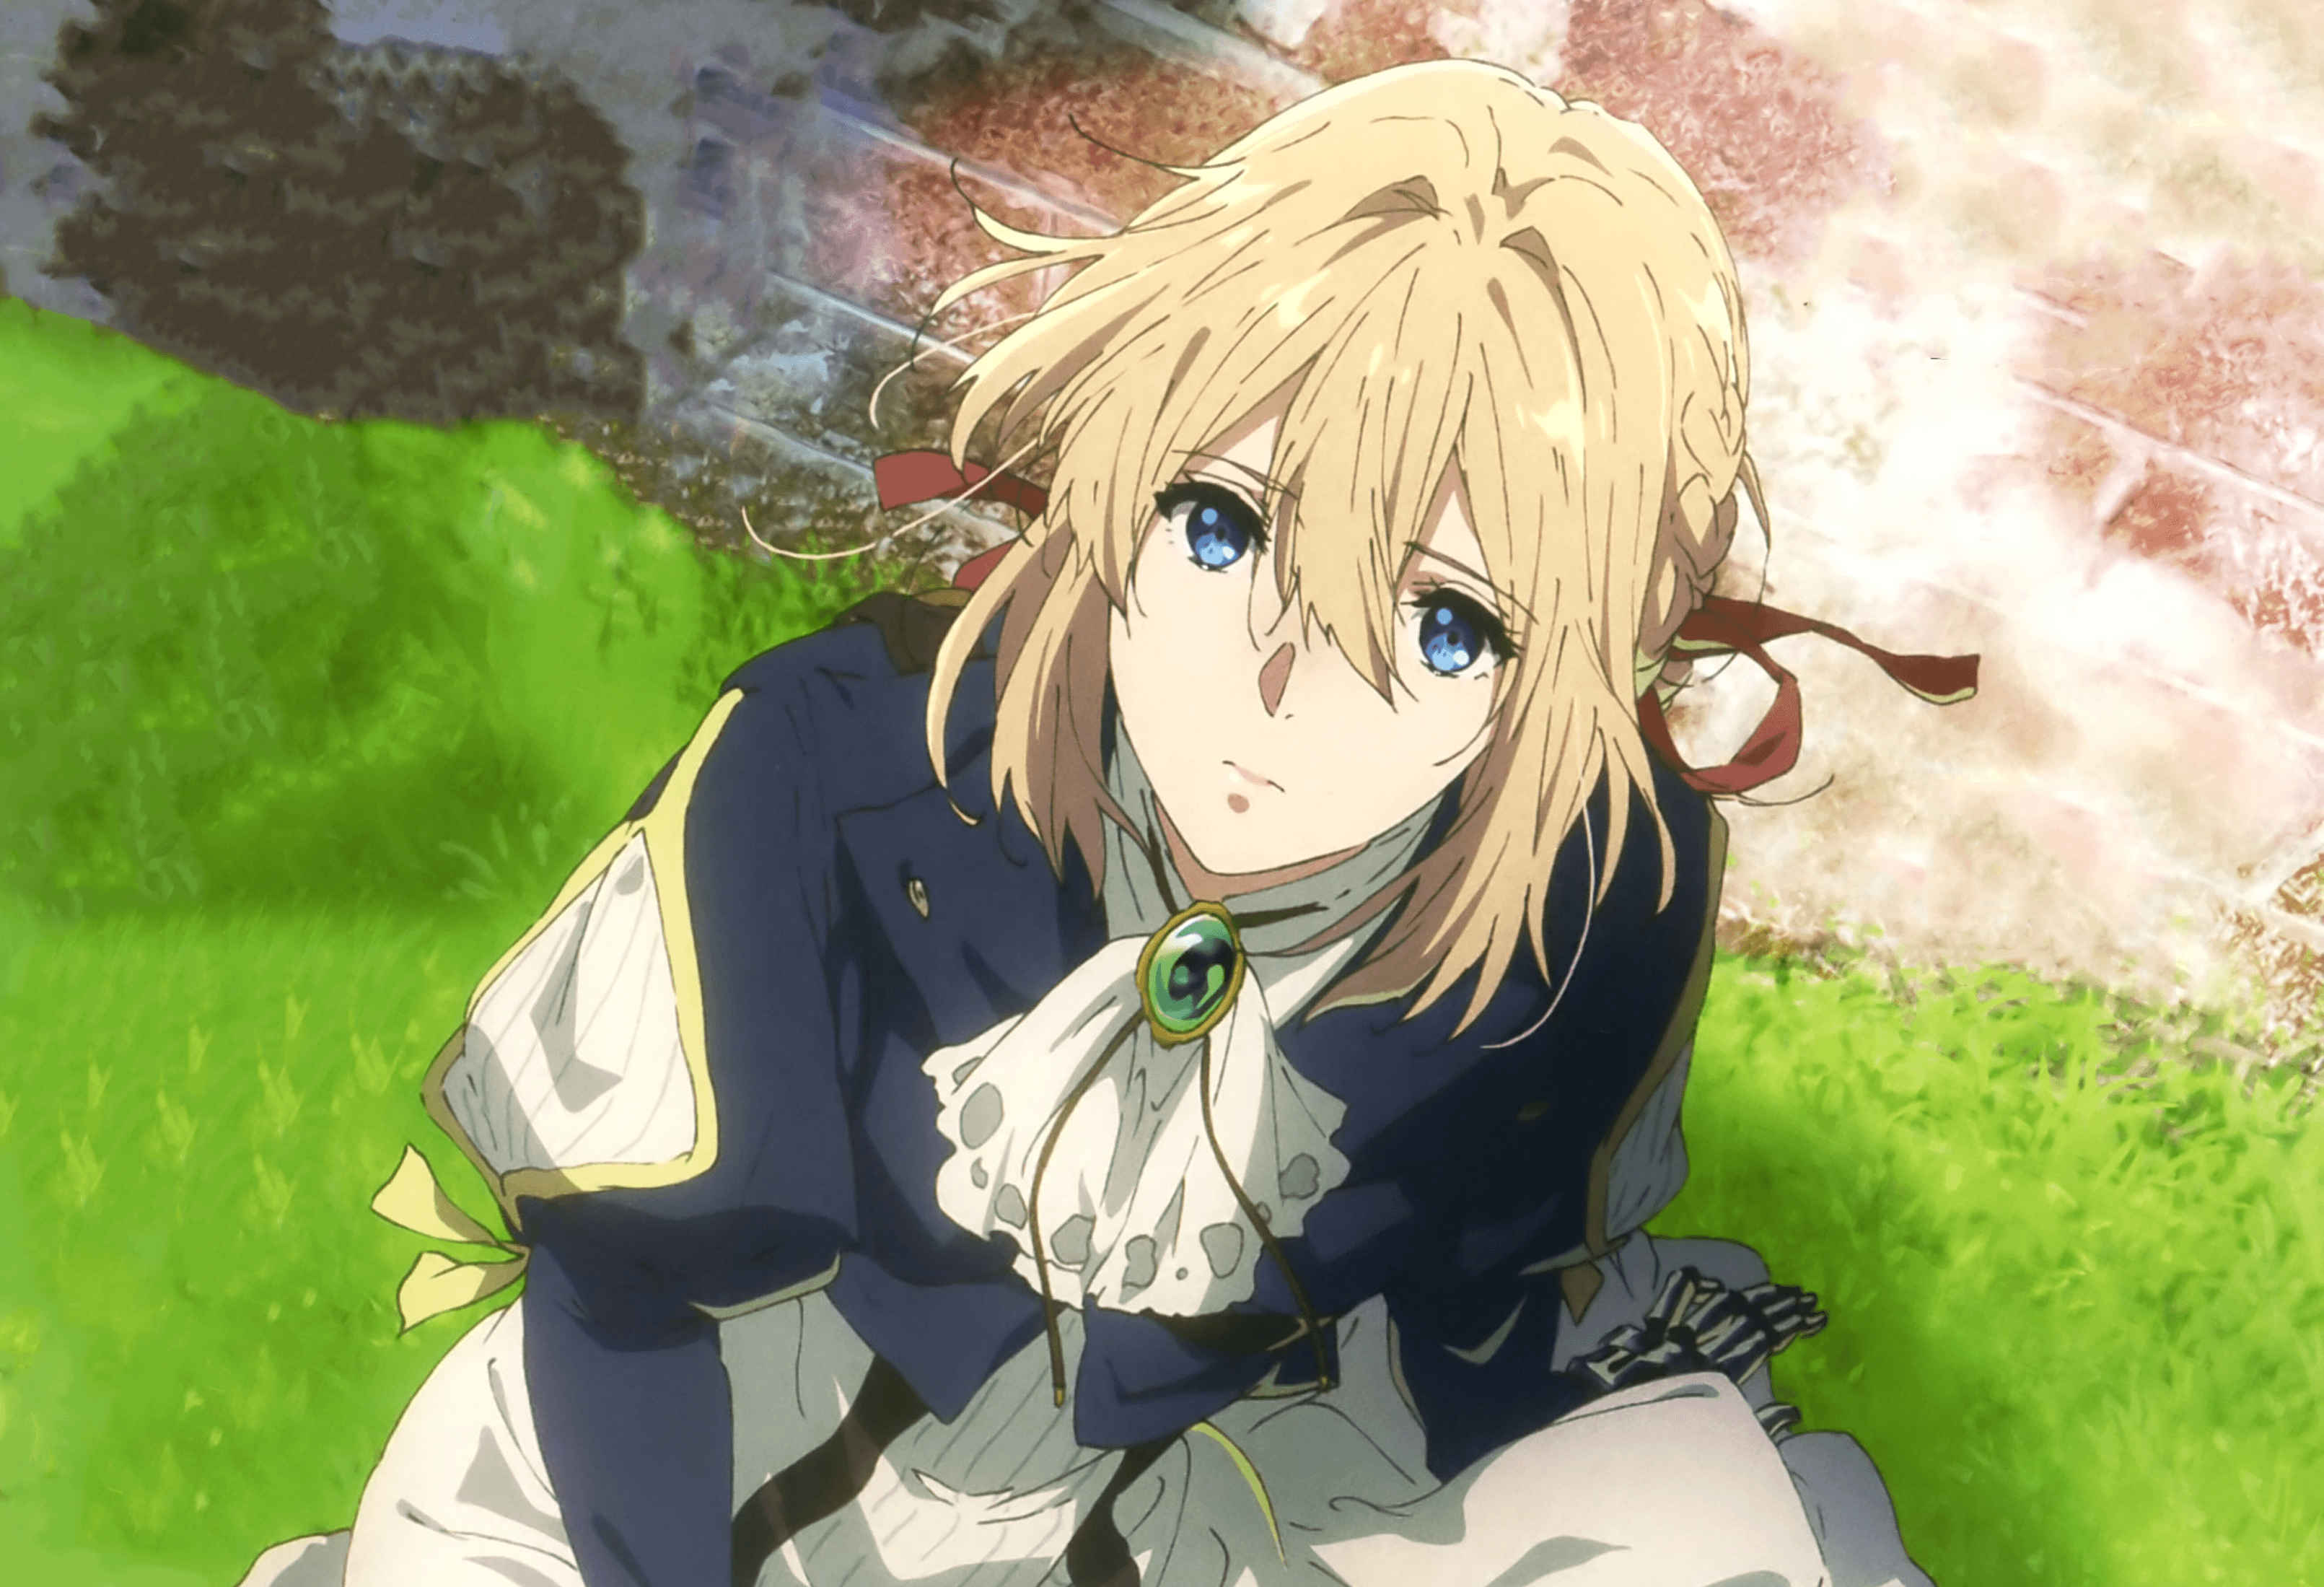 Violet Evergarden HD Wallpaper and Background Image